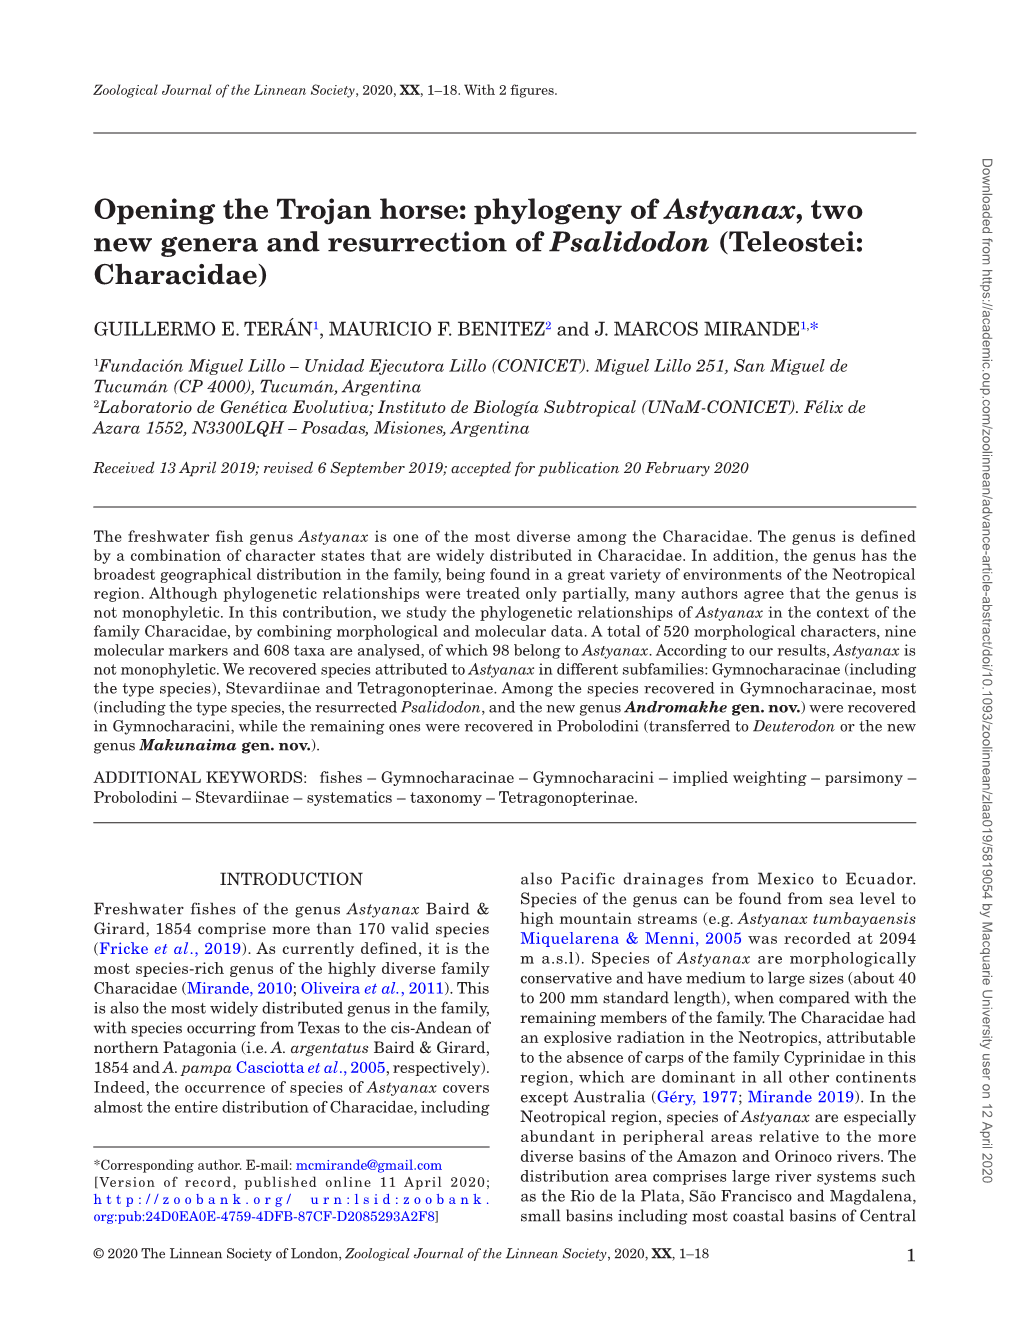 Opening the Trojan Horse: Phylogeny of Astyanax, Two New Genera and Resurrection of Psalidodon (Teleostei: Characidae)